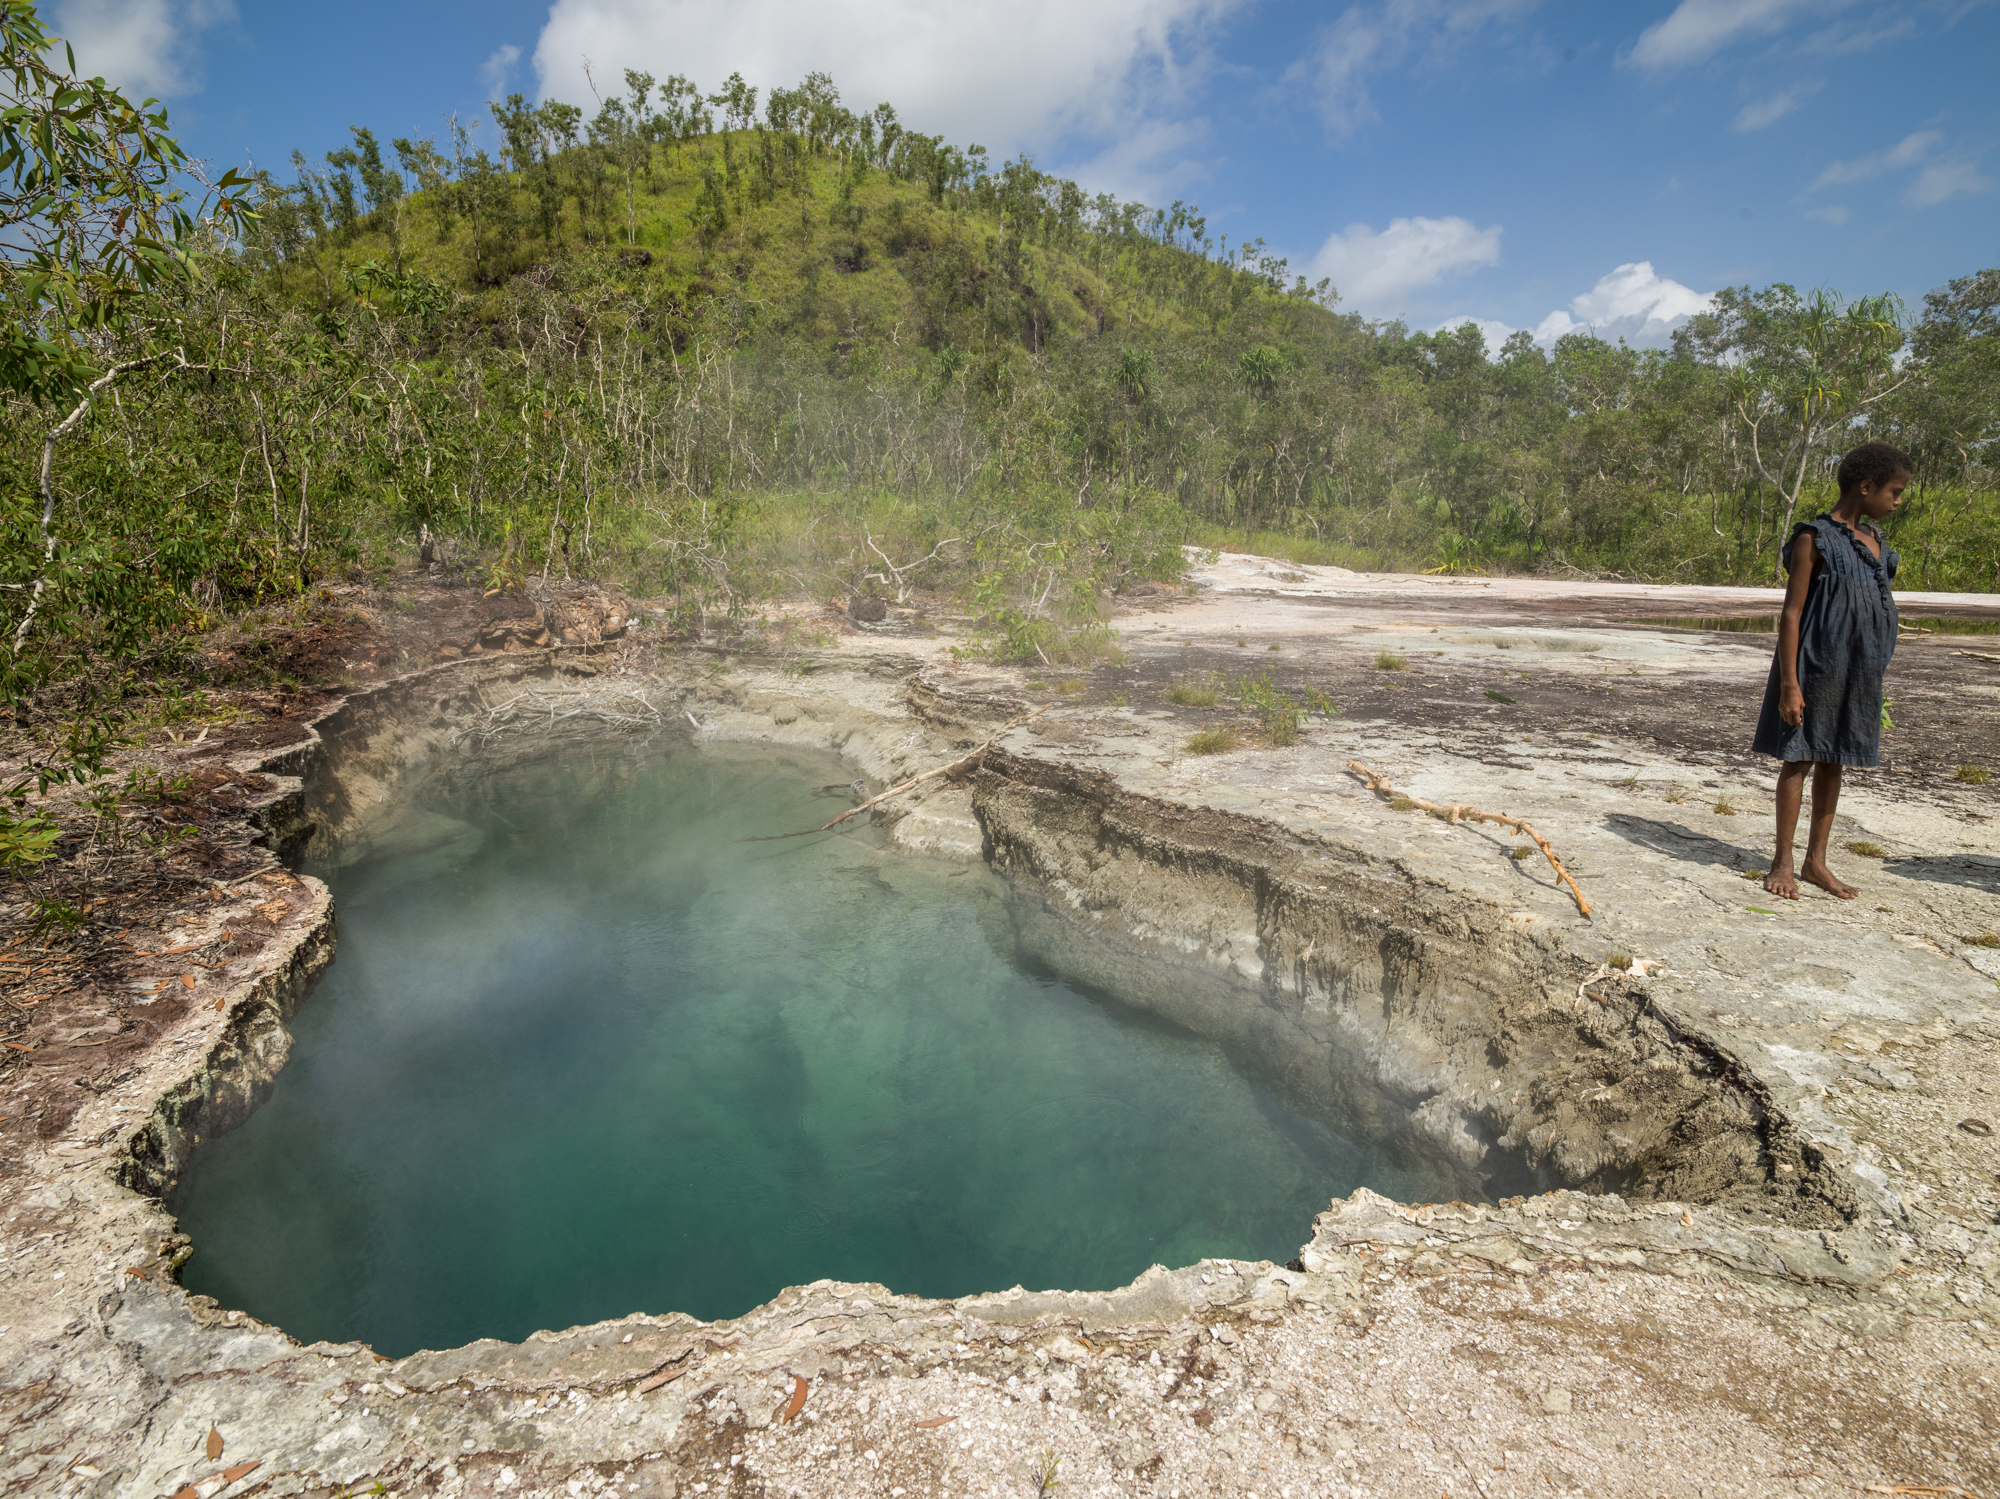   Geothermal pool, Fergusson Island, Papua New Guinea -  Though the volcanic activity is extinct, Fergusson Island has many geysers, hot springs and mud pools.  The boiling pools like this one are used by the locals to cook food wrapped in pandanus a